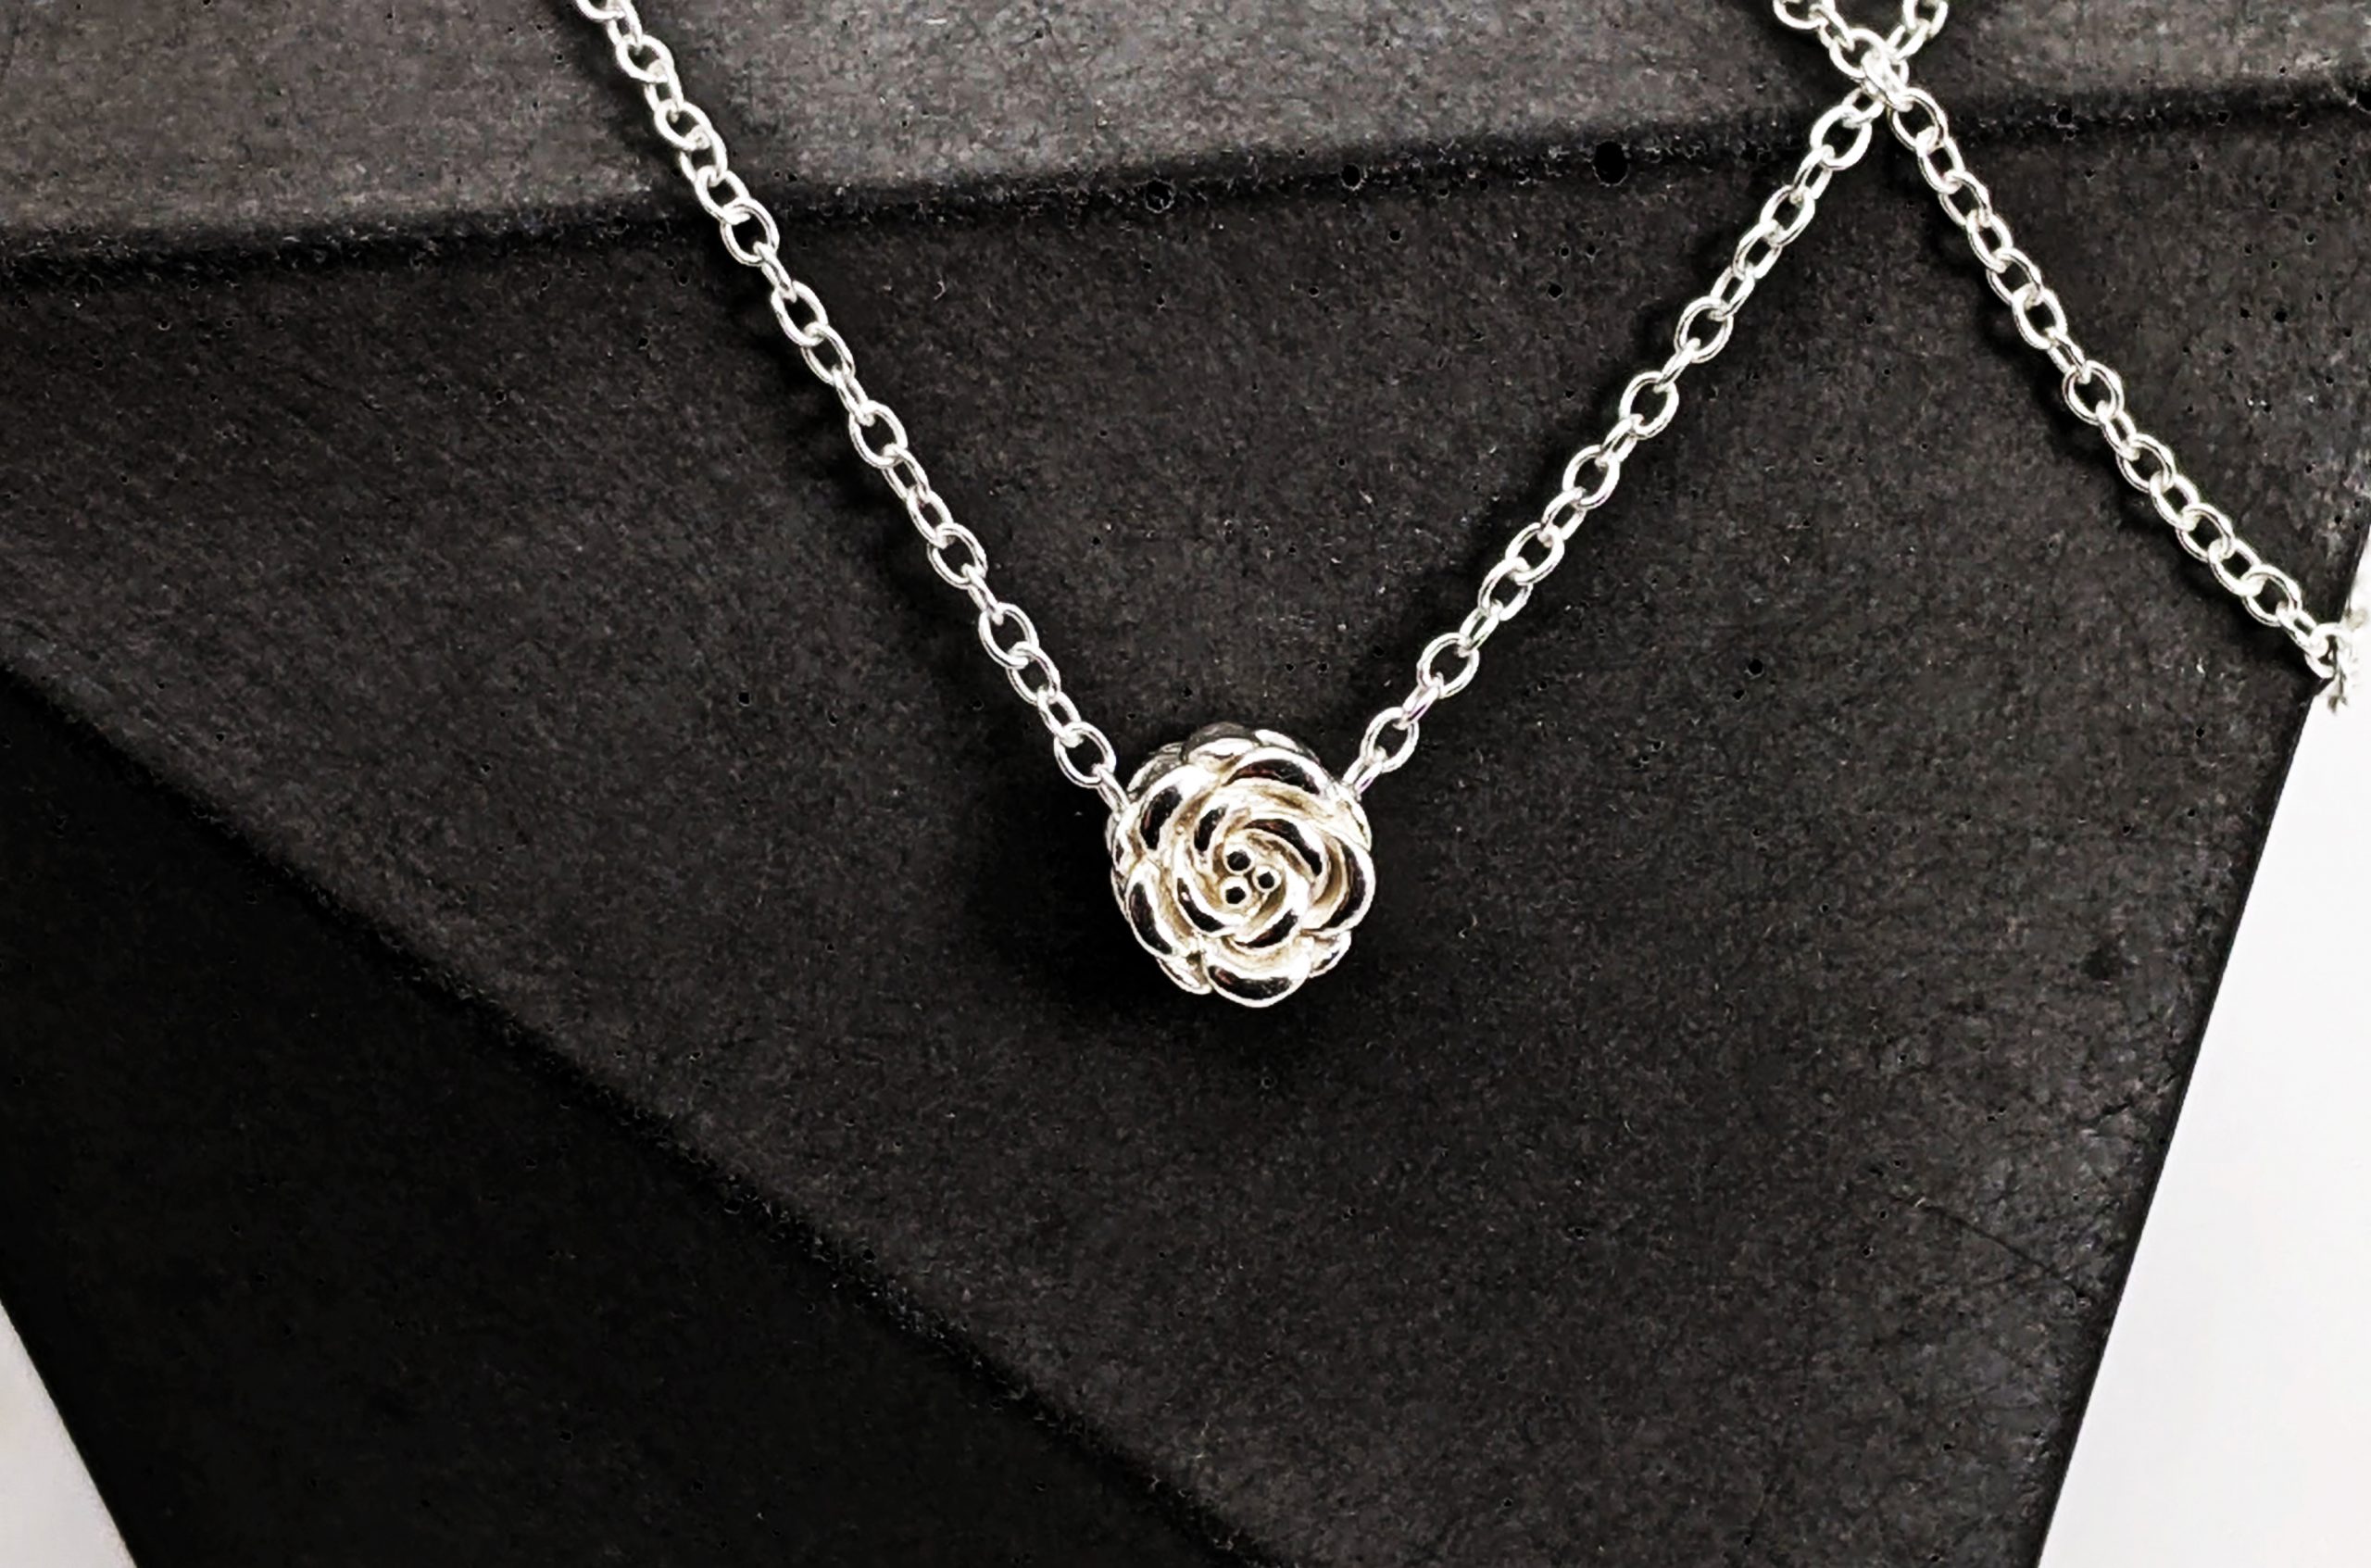 STERLING SILVER ROSE PENDANT NECKLACE - Howard's Jewelry Center